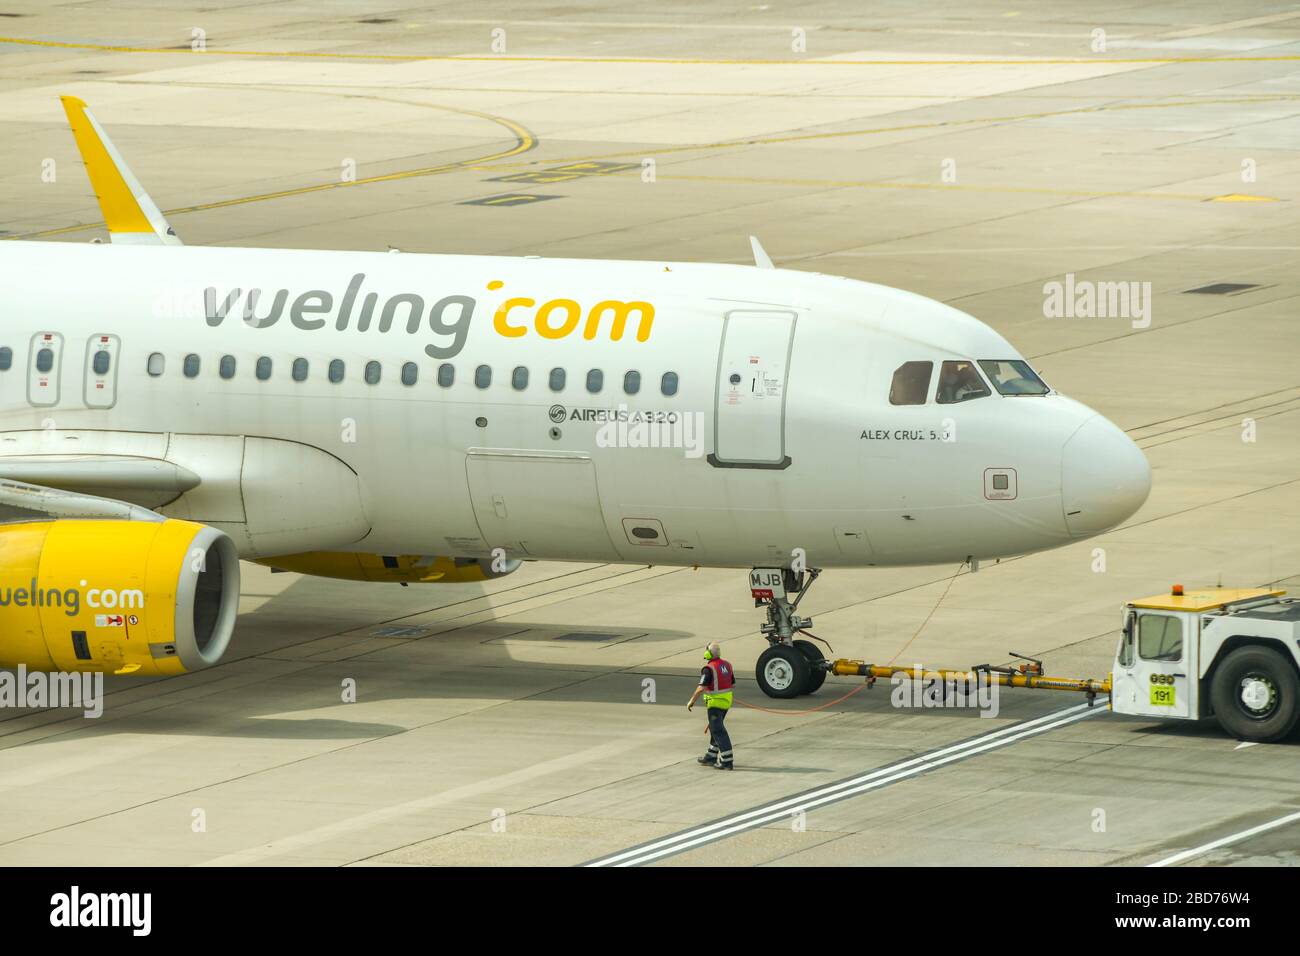 LONDON GATWICK AIRPORT - APRIL 2019: Airbus A320 jet operated by Spanish airline Vueling being pushed back by a tug at London Gatwick Airport Stock Photo